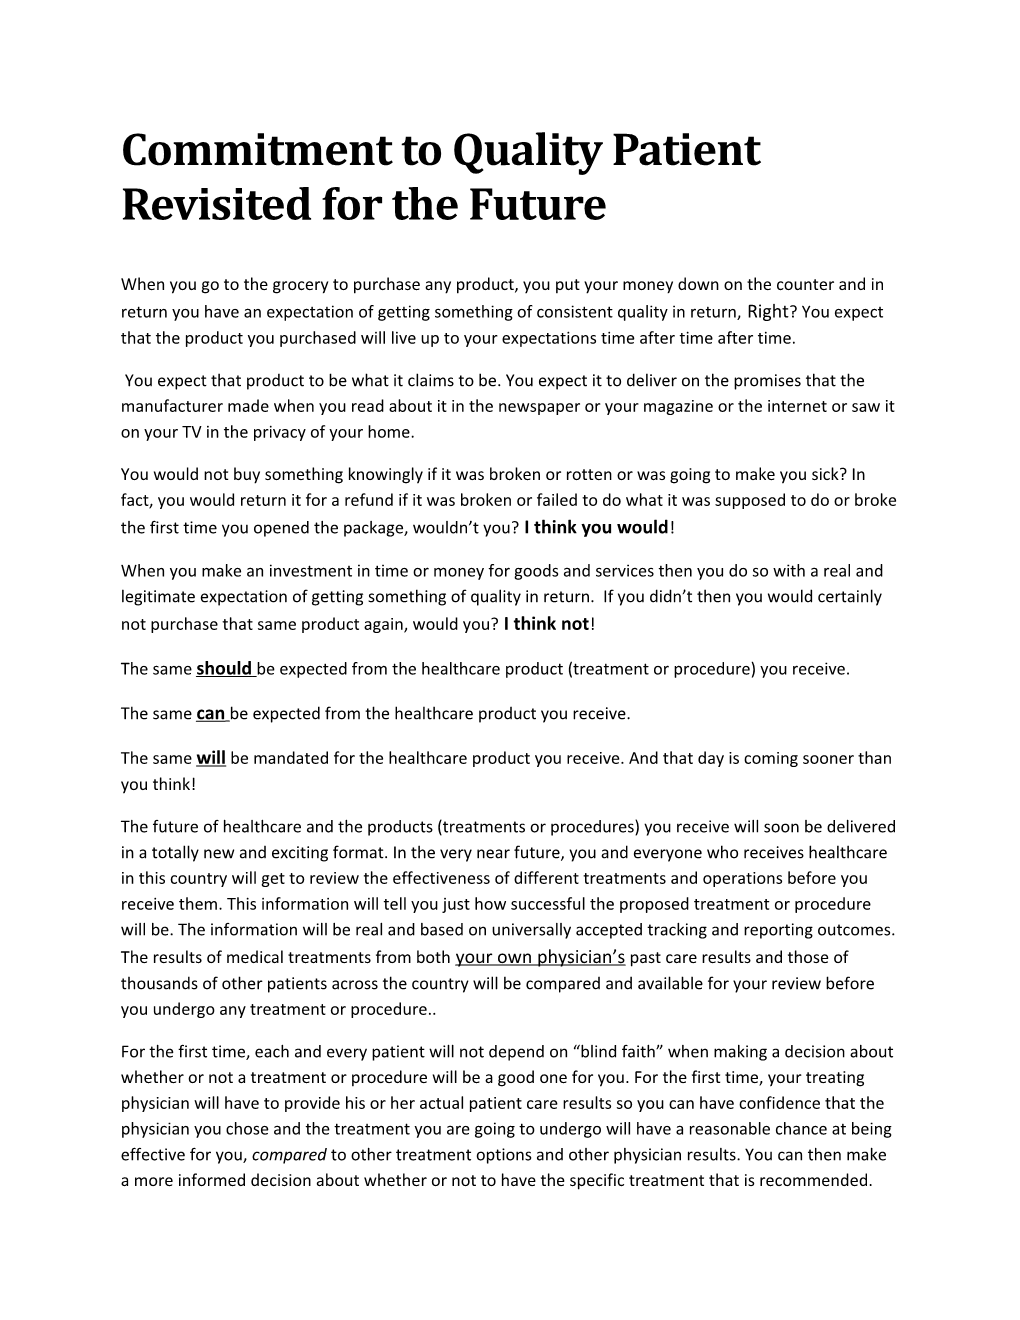 Commitment to Quality Patient Revisited for the Future